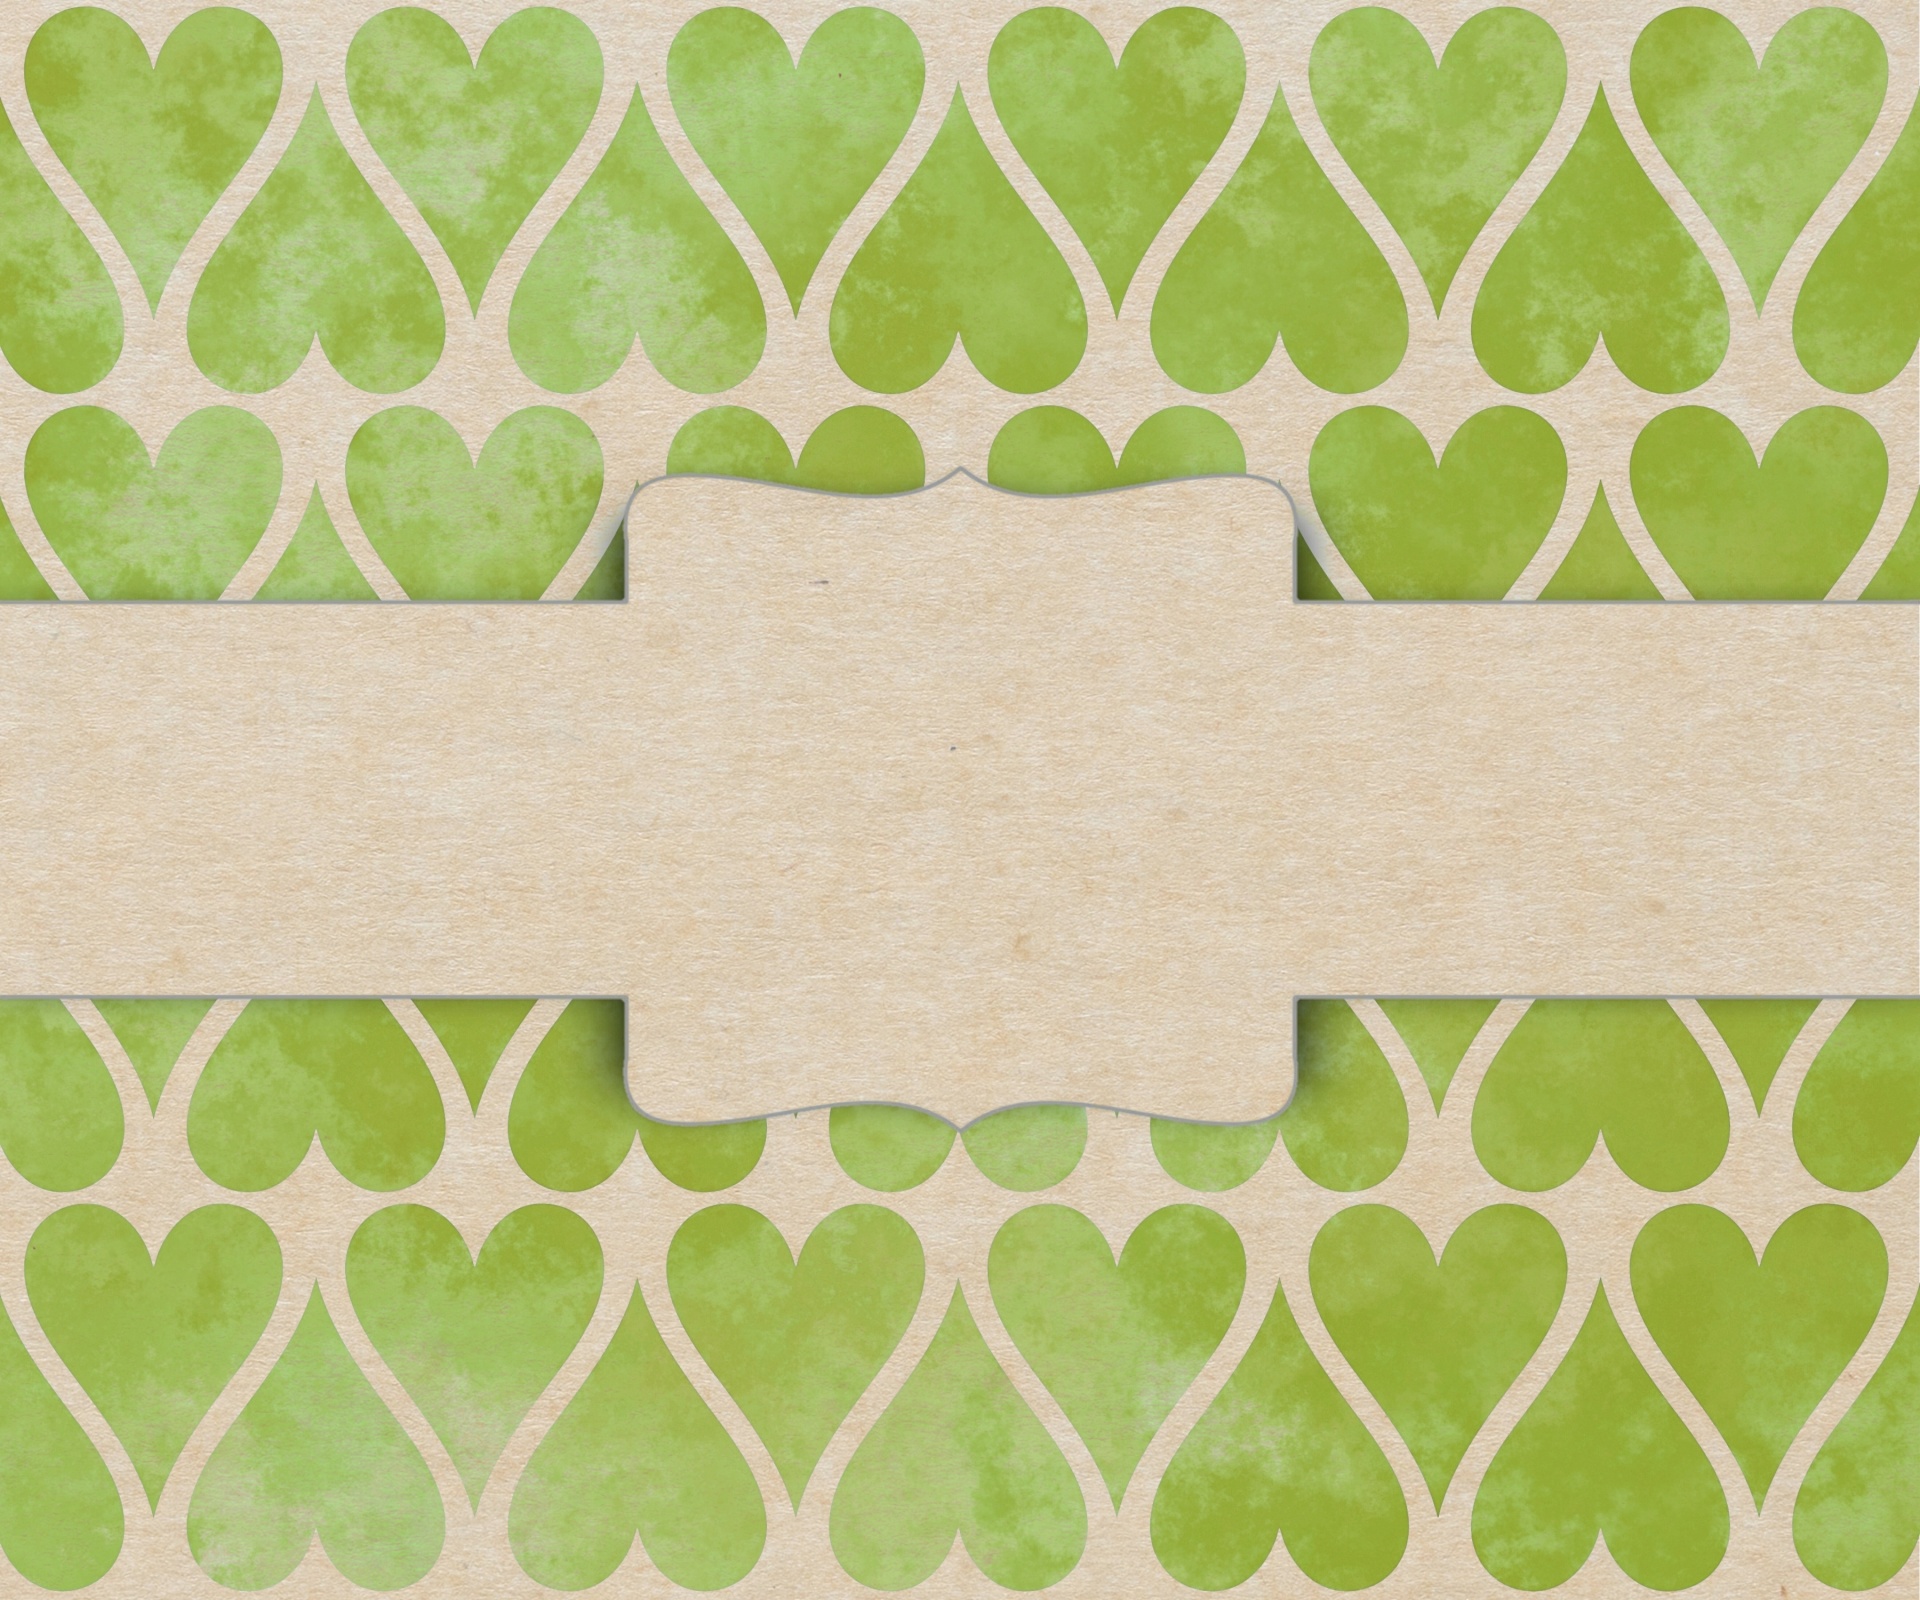 Hearts vintage background paper with cord label